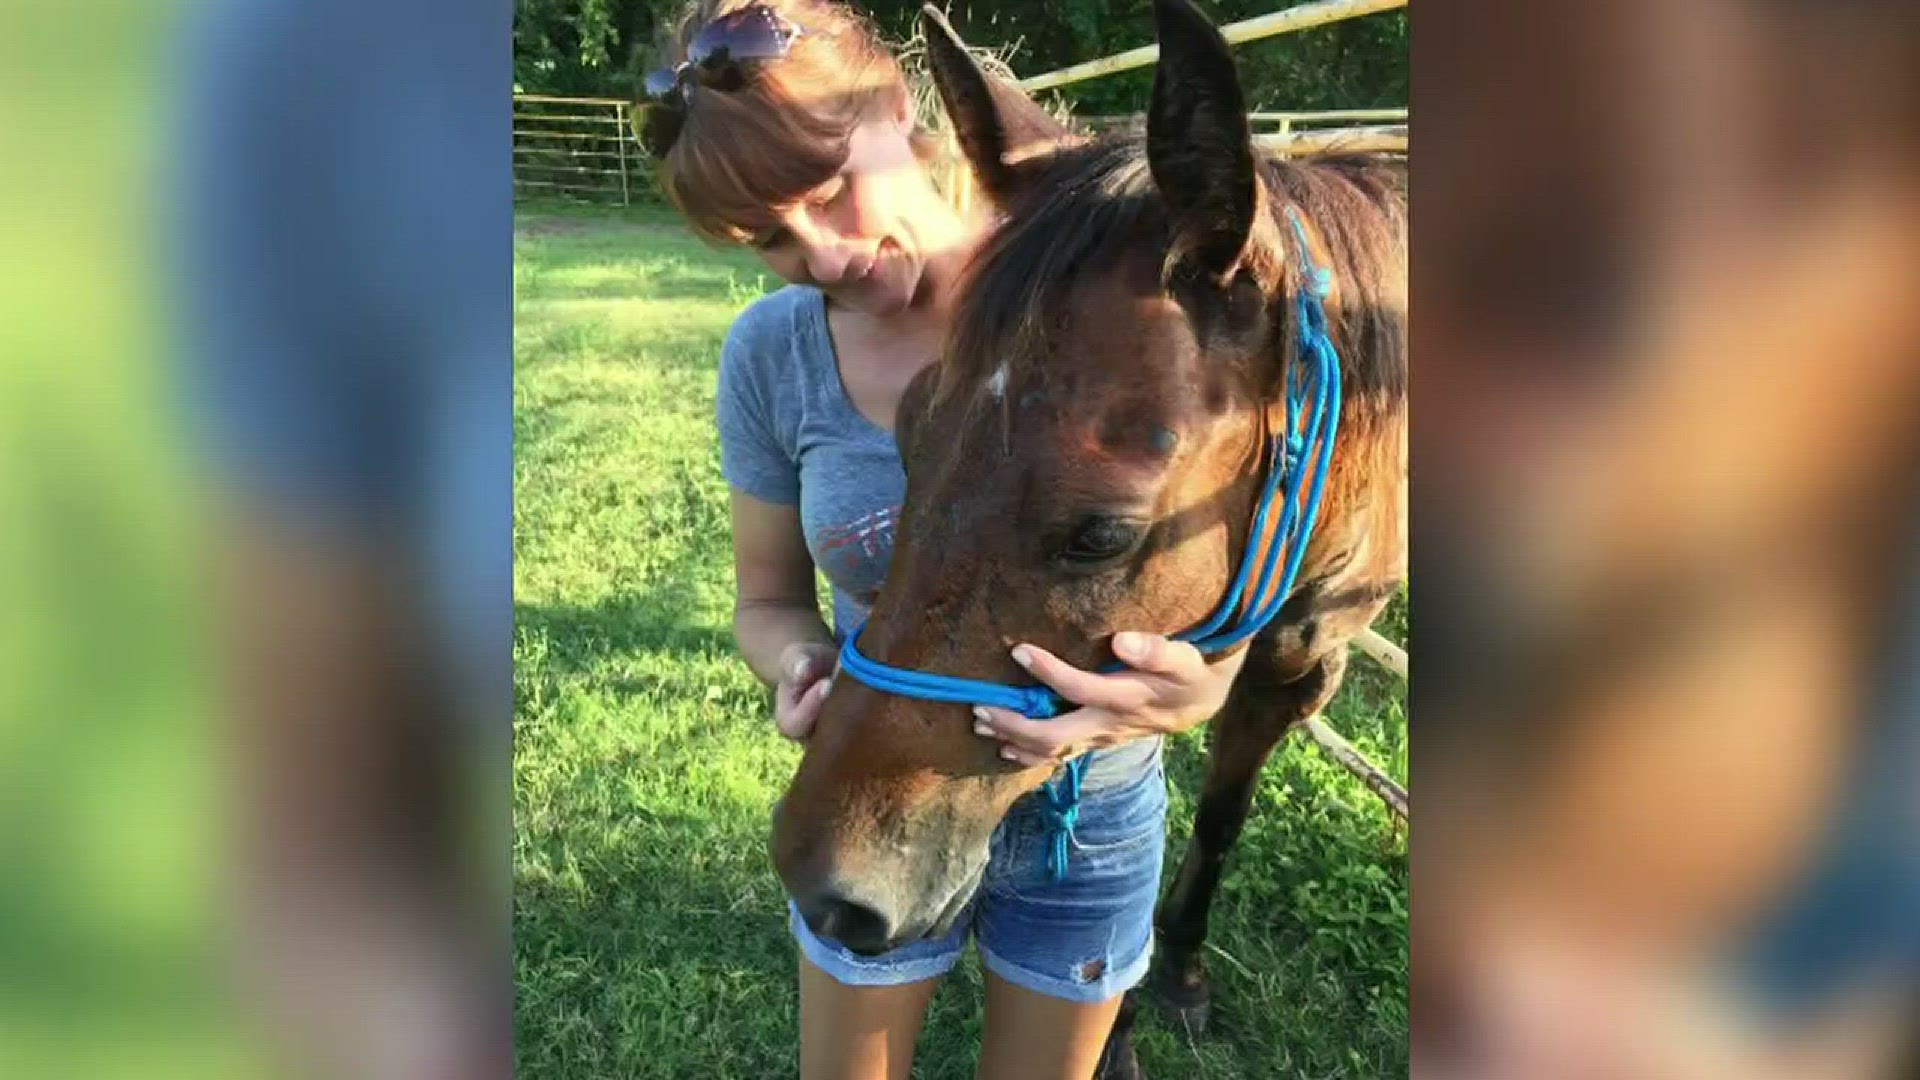 A horse reported stolen from a La Marque rescue facility earlier this week was found Thursday on a property in Hitchcock.